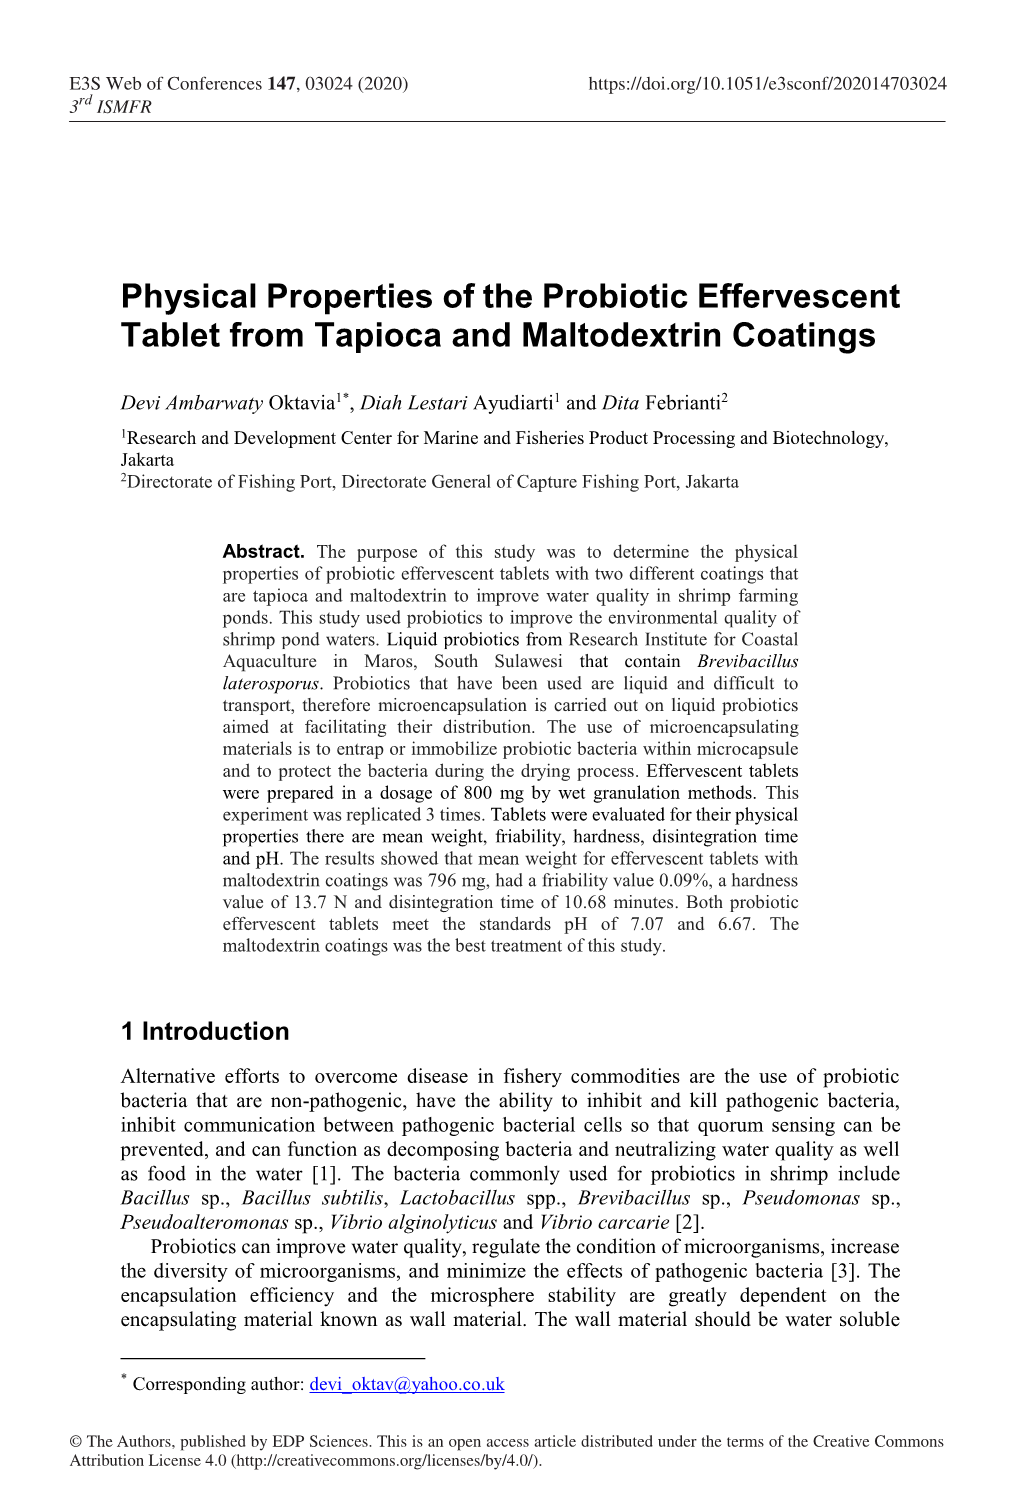 Physical Properties of the Probiotic Effervescent Tablet from Tapioca and Maltodextrin Coatings